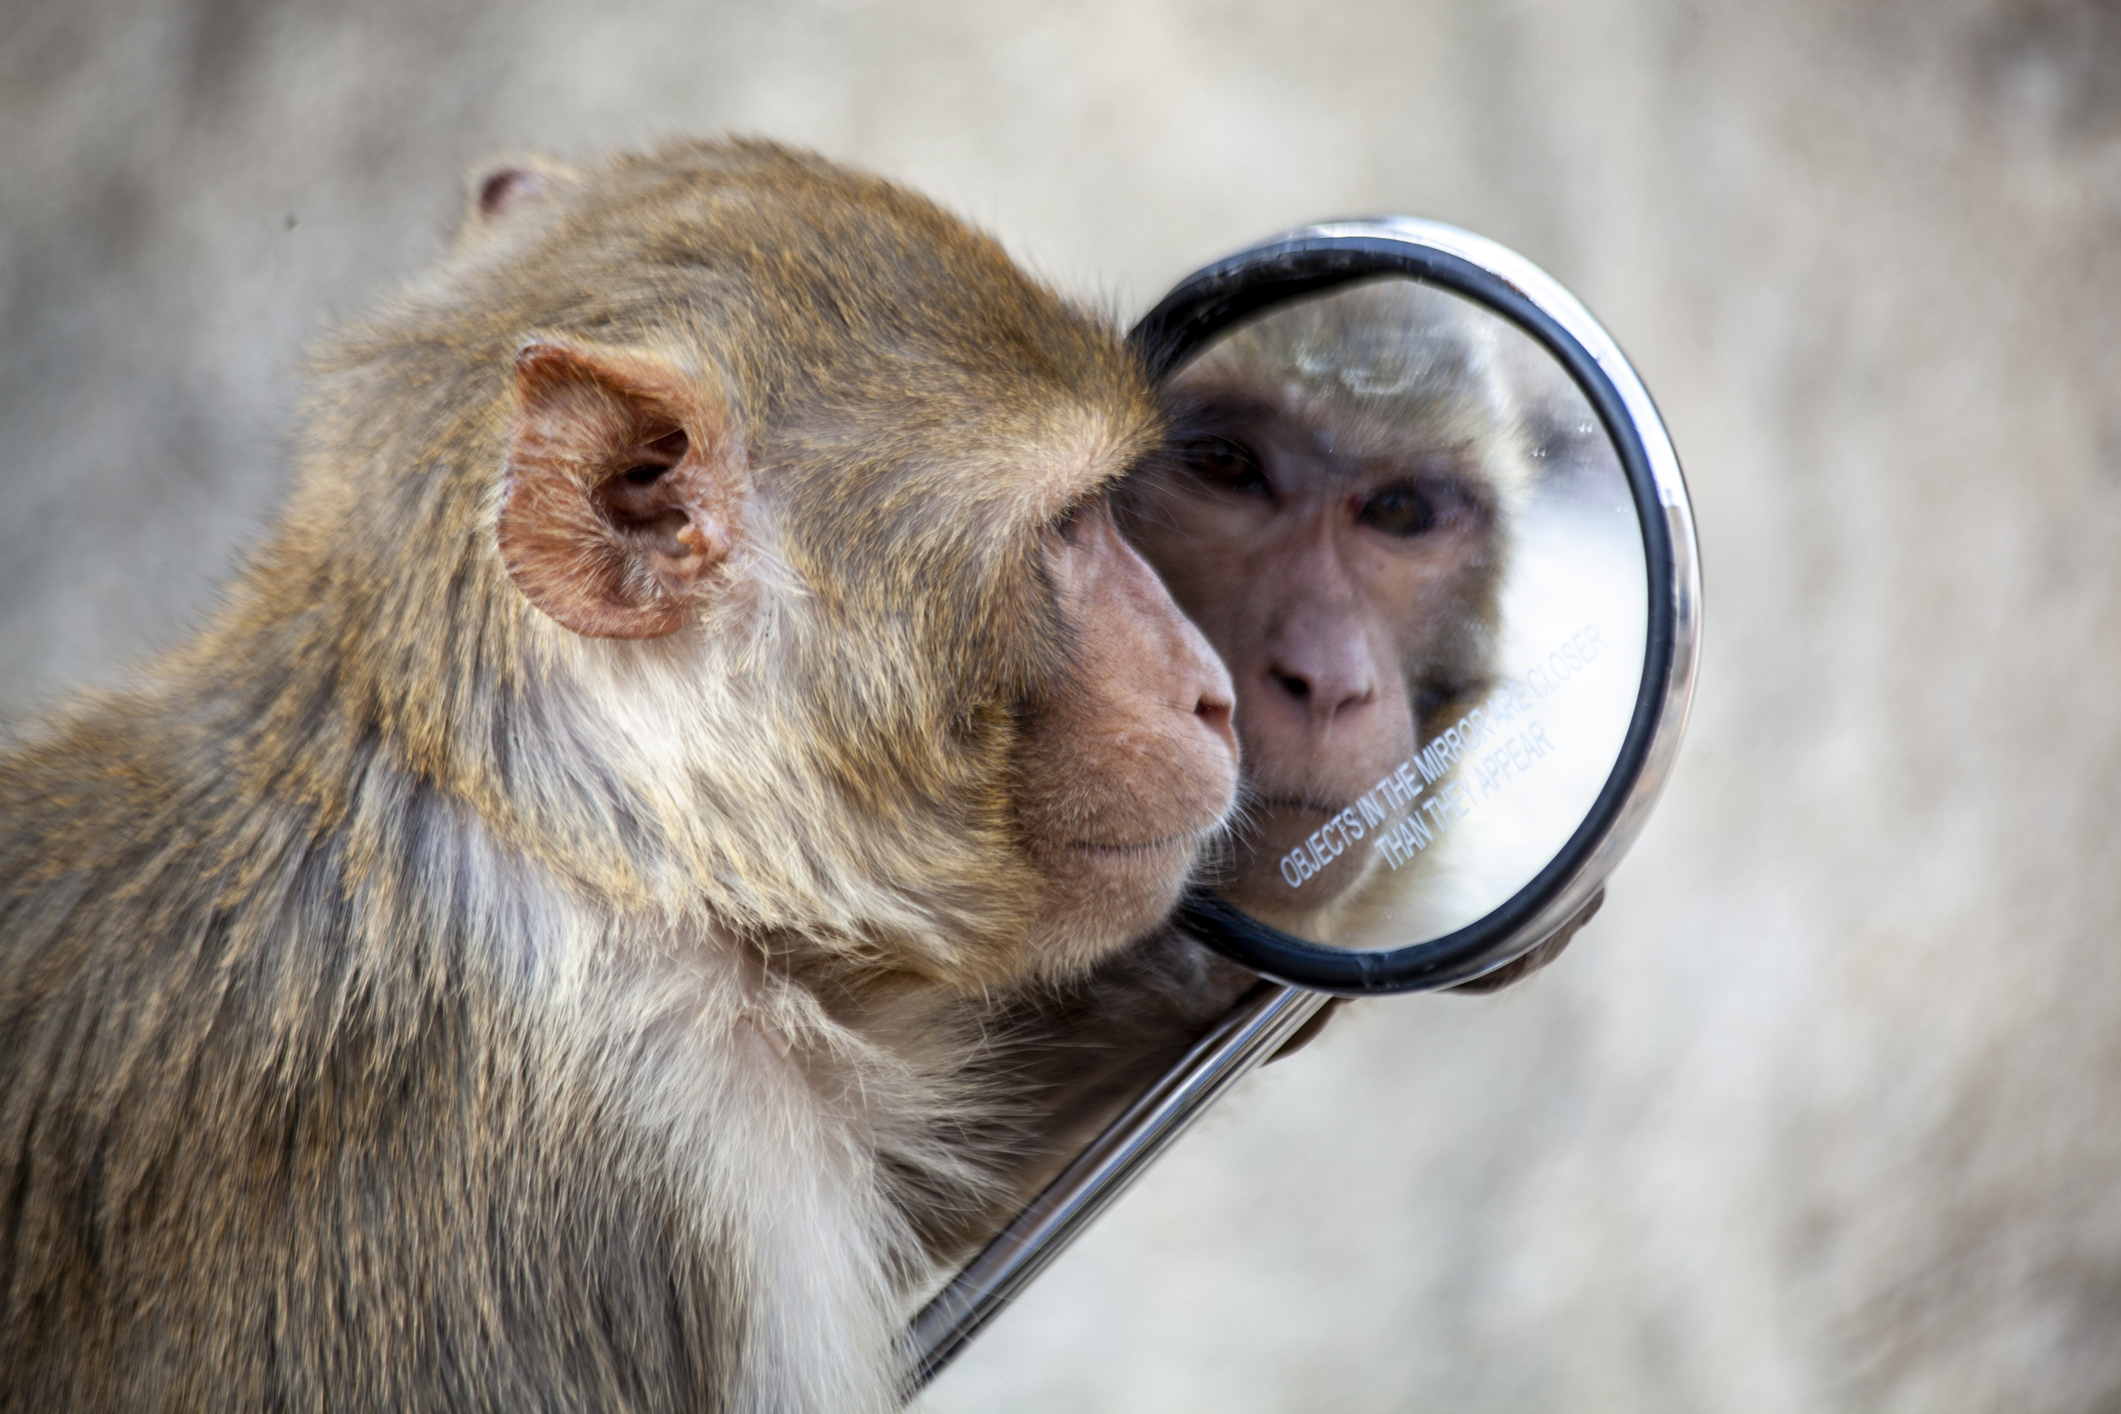 Can any animal recognize its reflection? New studies shake up old ideas